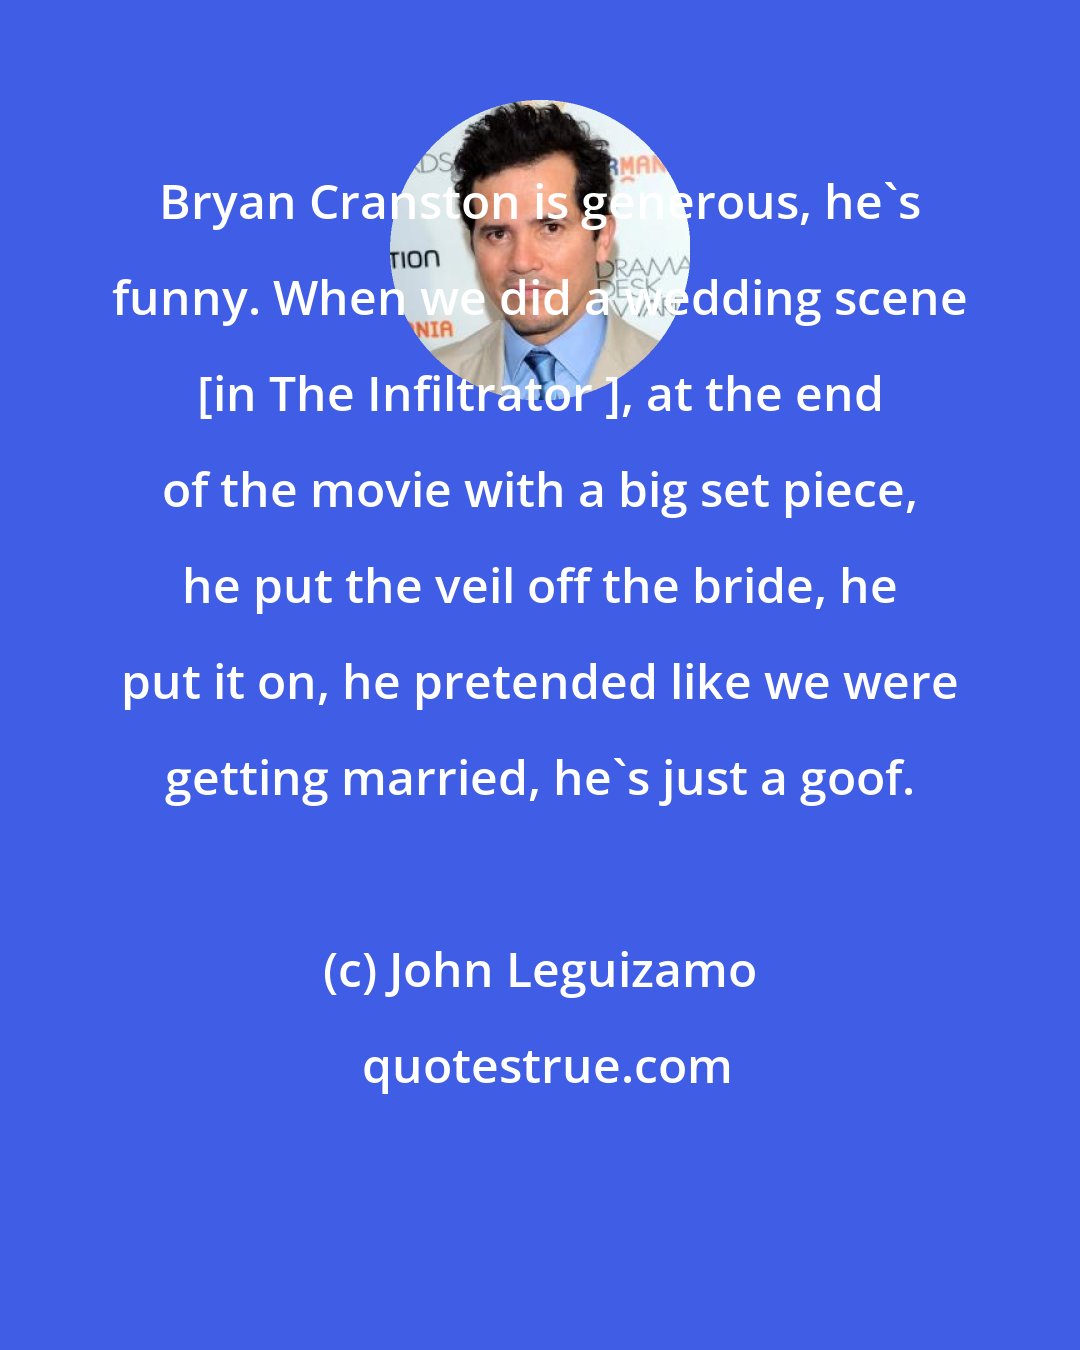 John Leguizamo: Bryan Cranston is generous, he's funny. When we did a wedding scene [in The Infiltrator ], at the end of the movie with a big set piece, he put the veil off the bride, he put it on, he pretended like we were getting married, he's just a goof.